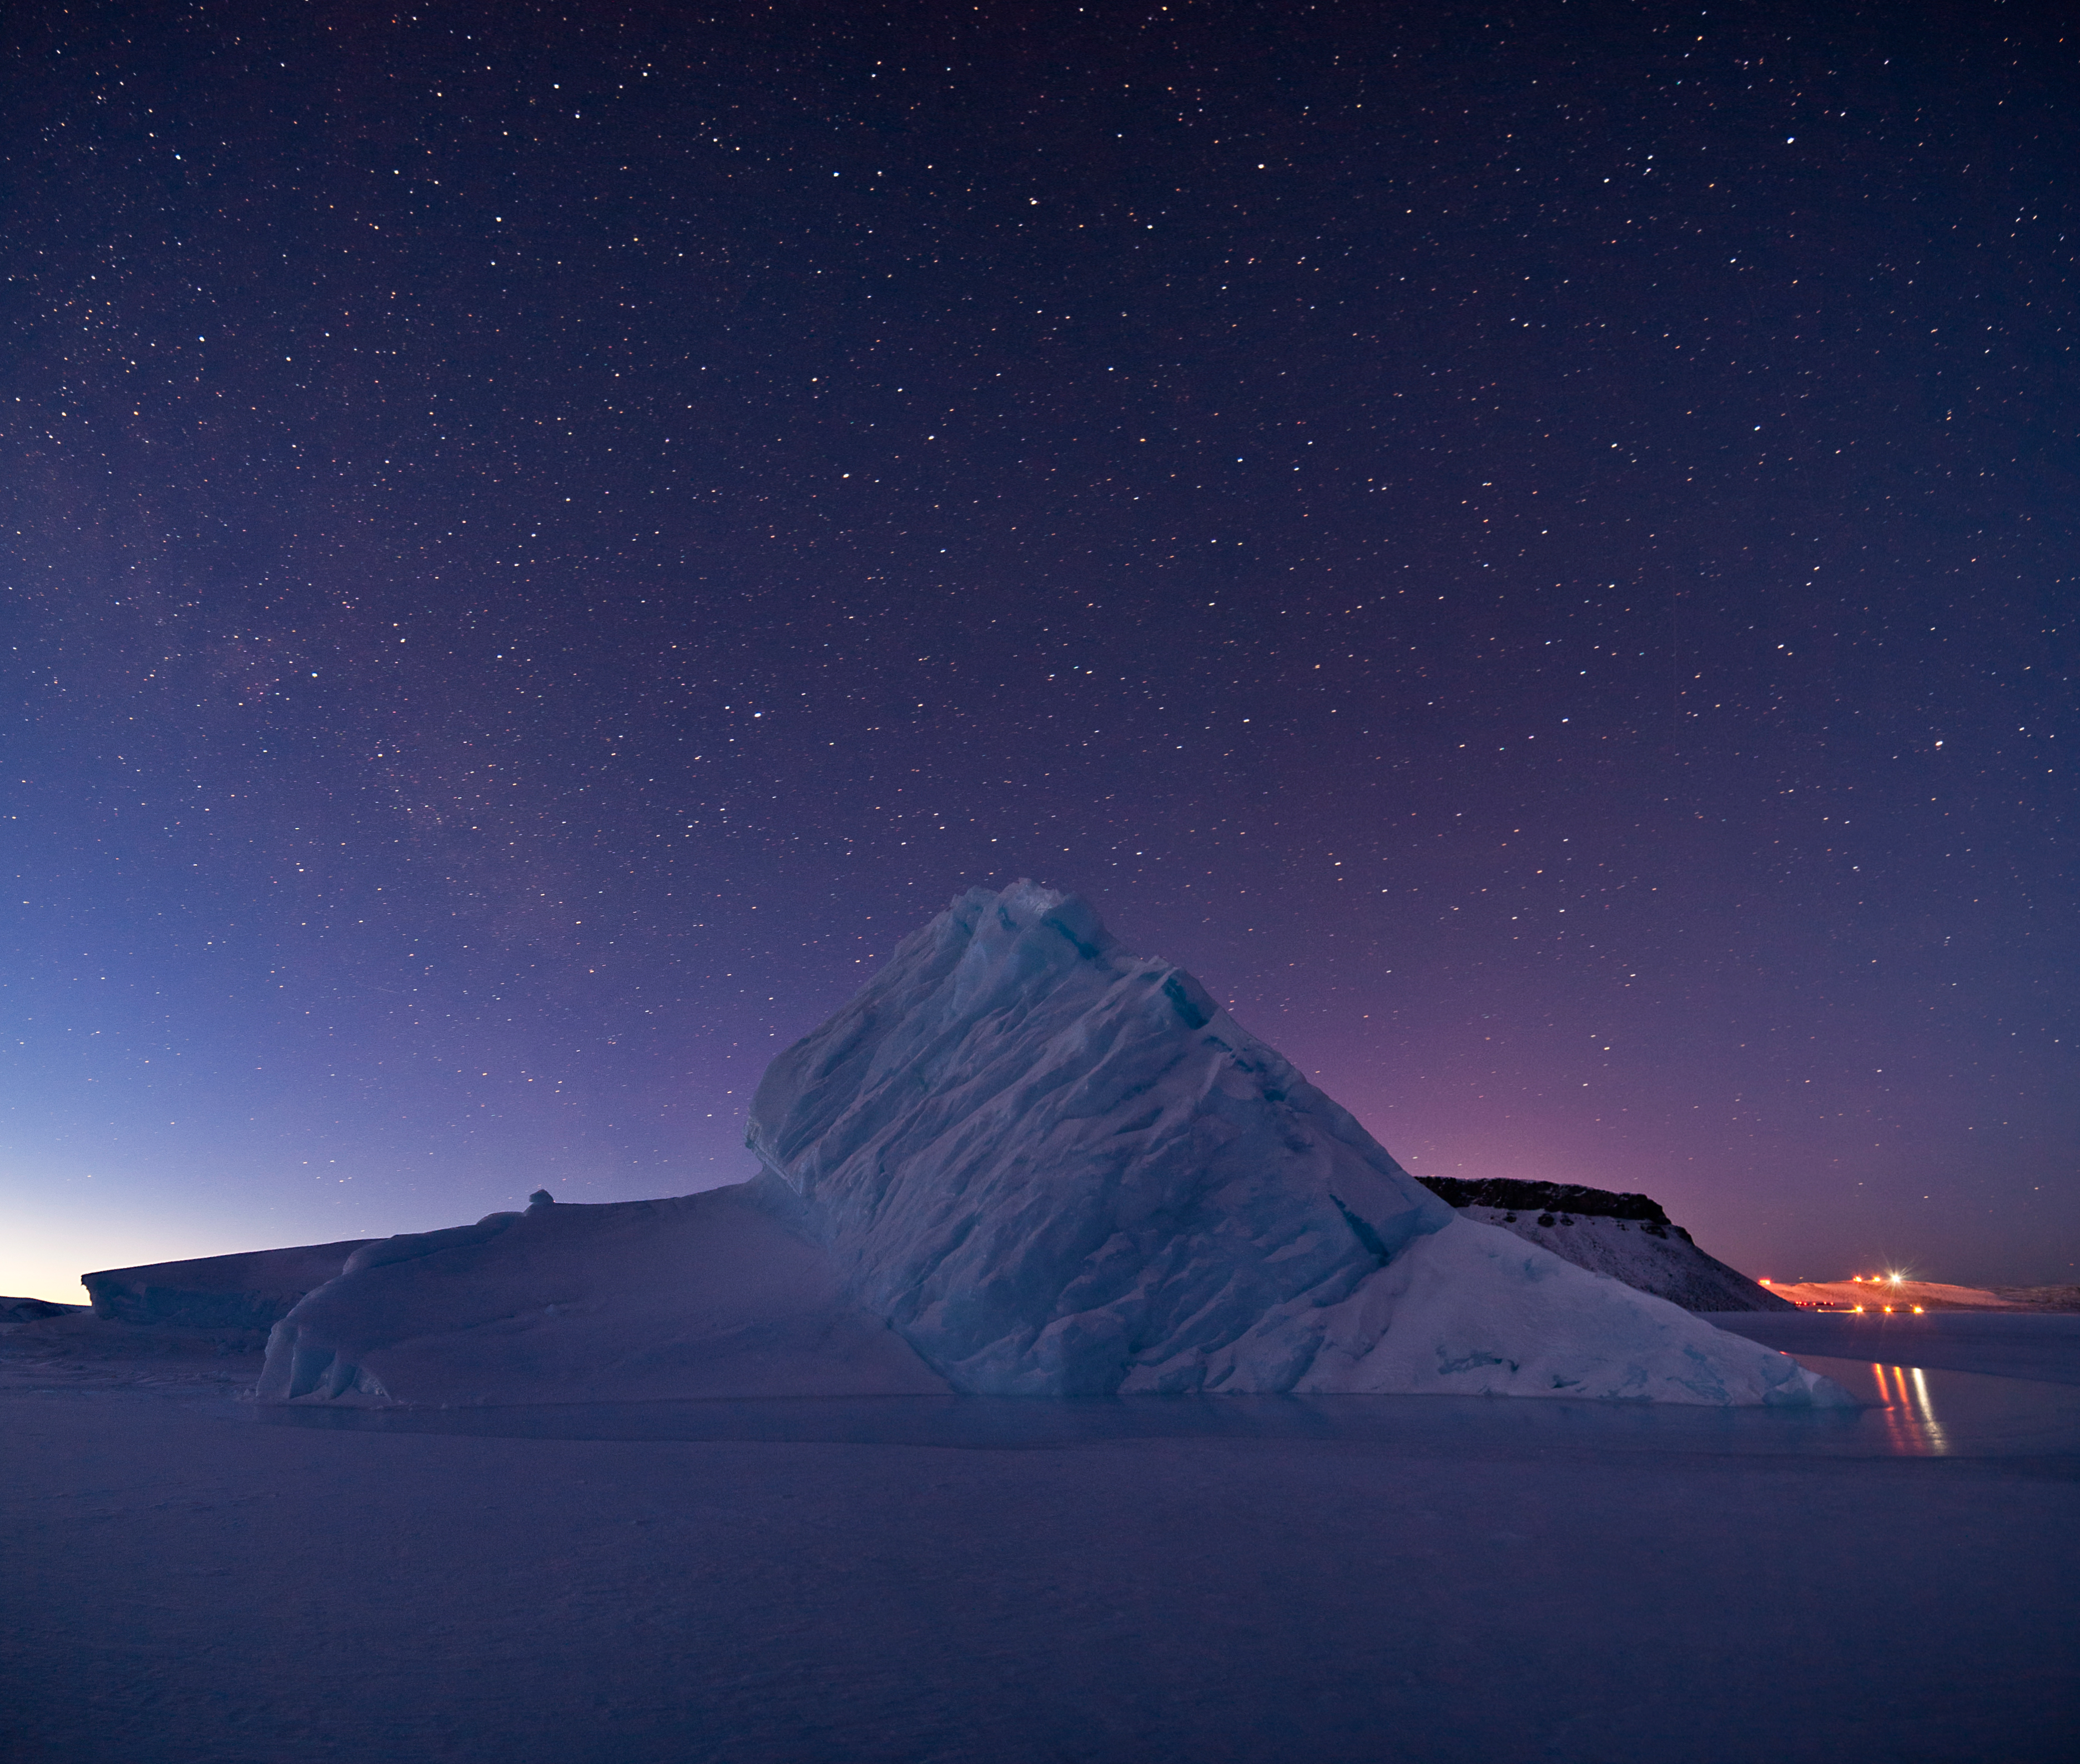 Iceberg in North Star Bay, Greenland - related image preview